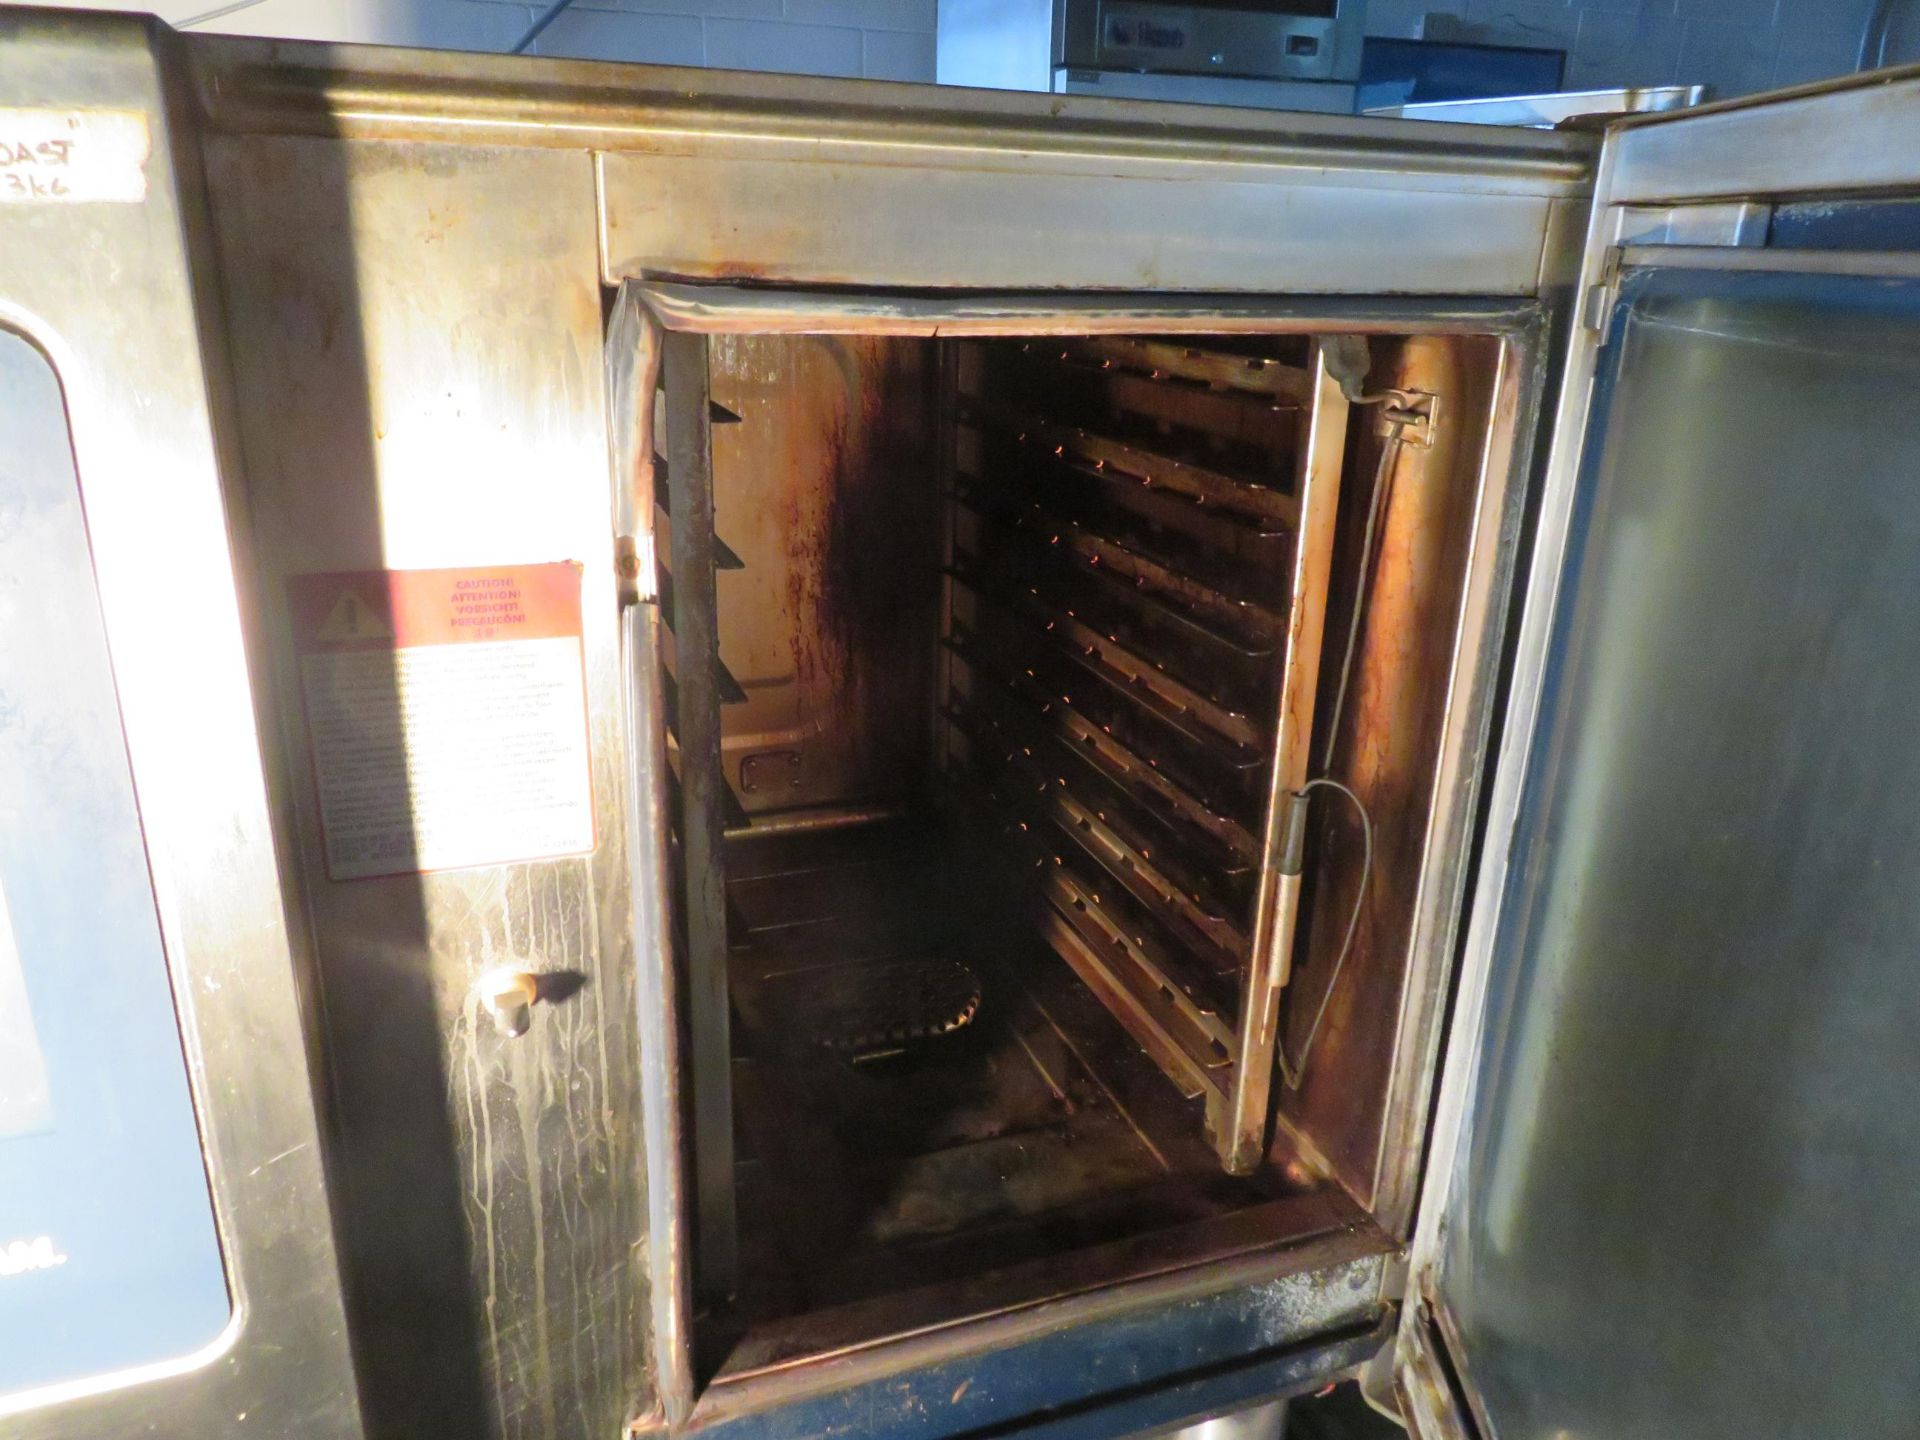 ALTO-SHAAM convection oven with rack on wheels, Mod #CTP6-10E, approx. 35"w x 35"d x 35"h - Image 5 of 5